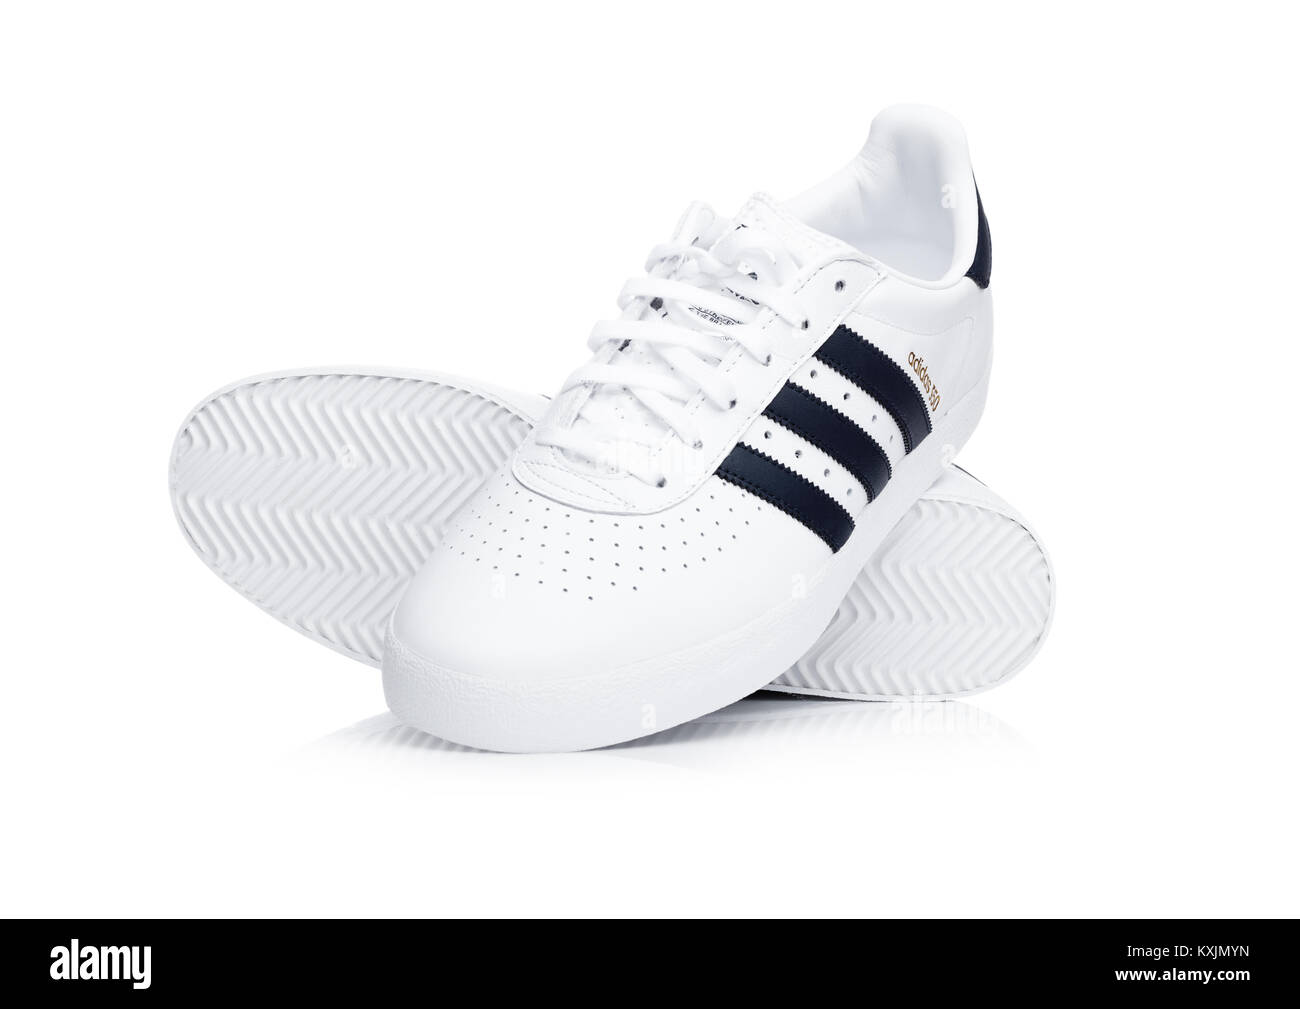 LONDON, UK - JANUARY 02, 2018: Adidas Originals shoes on white background.  German multinational corporation that designs and manufactures sports shoes  Stock Photo - Alamy